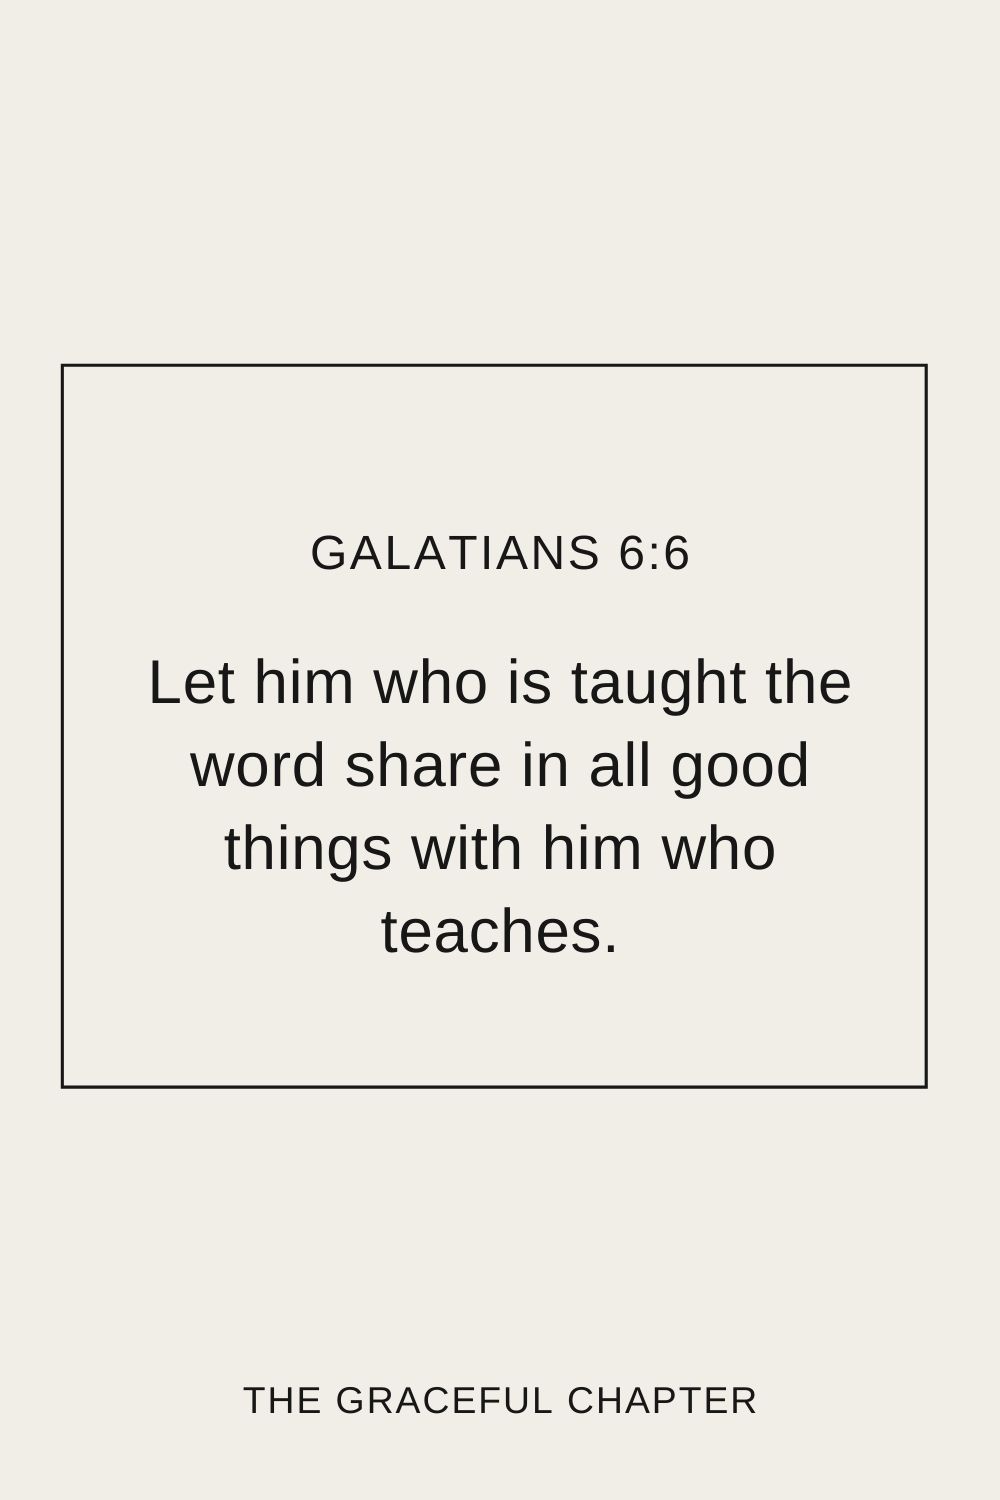 Let him who is taught the word share in all good things with him who teaches. Galatians 6:6